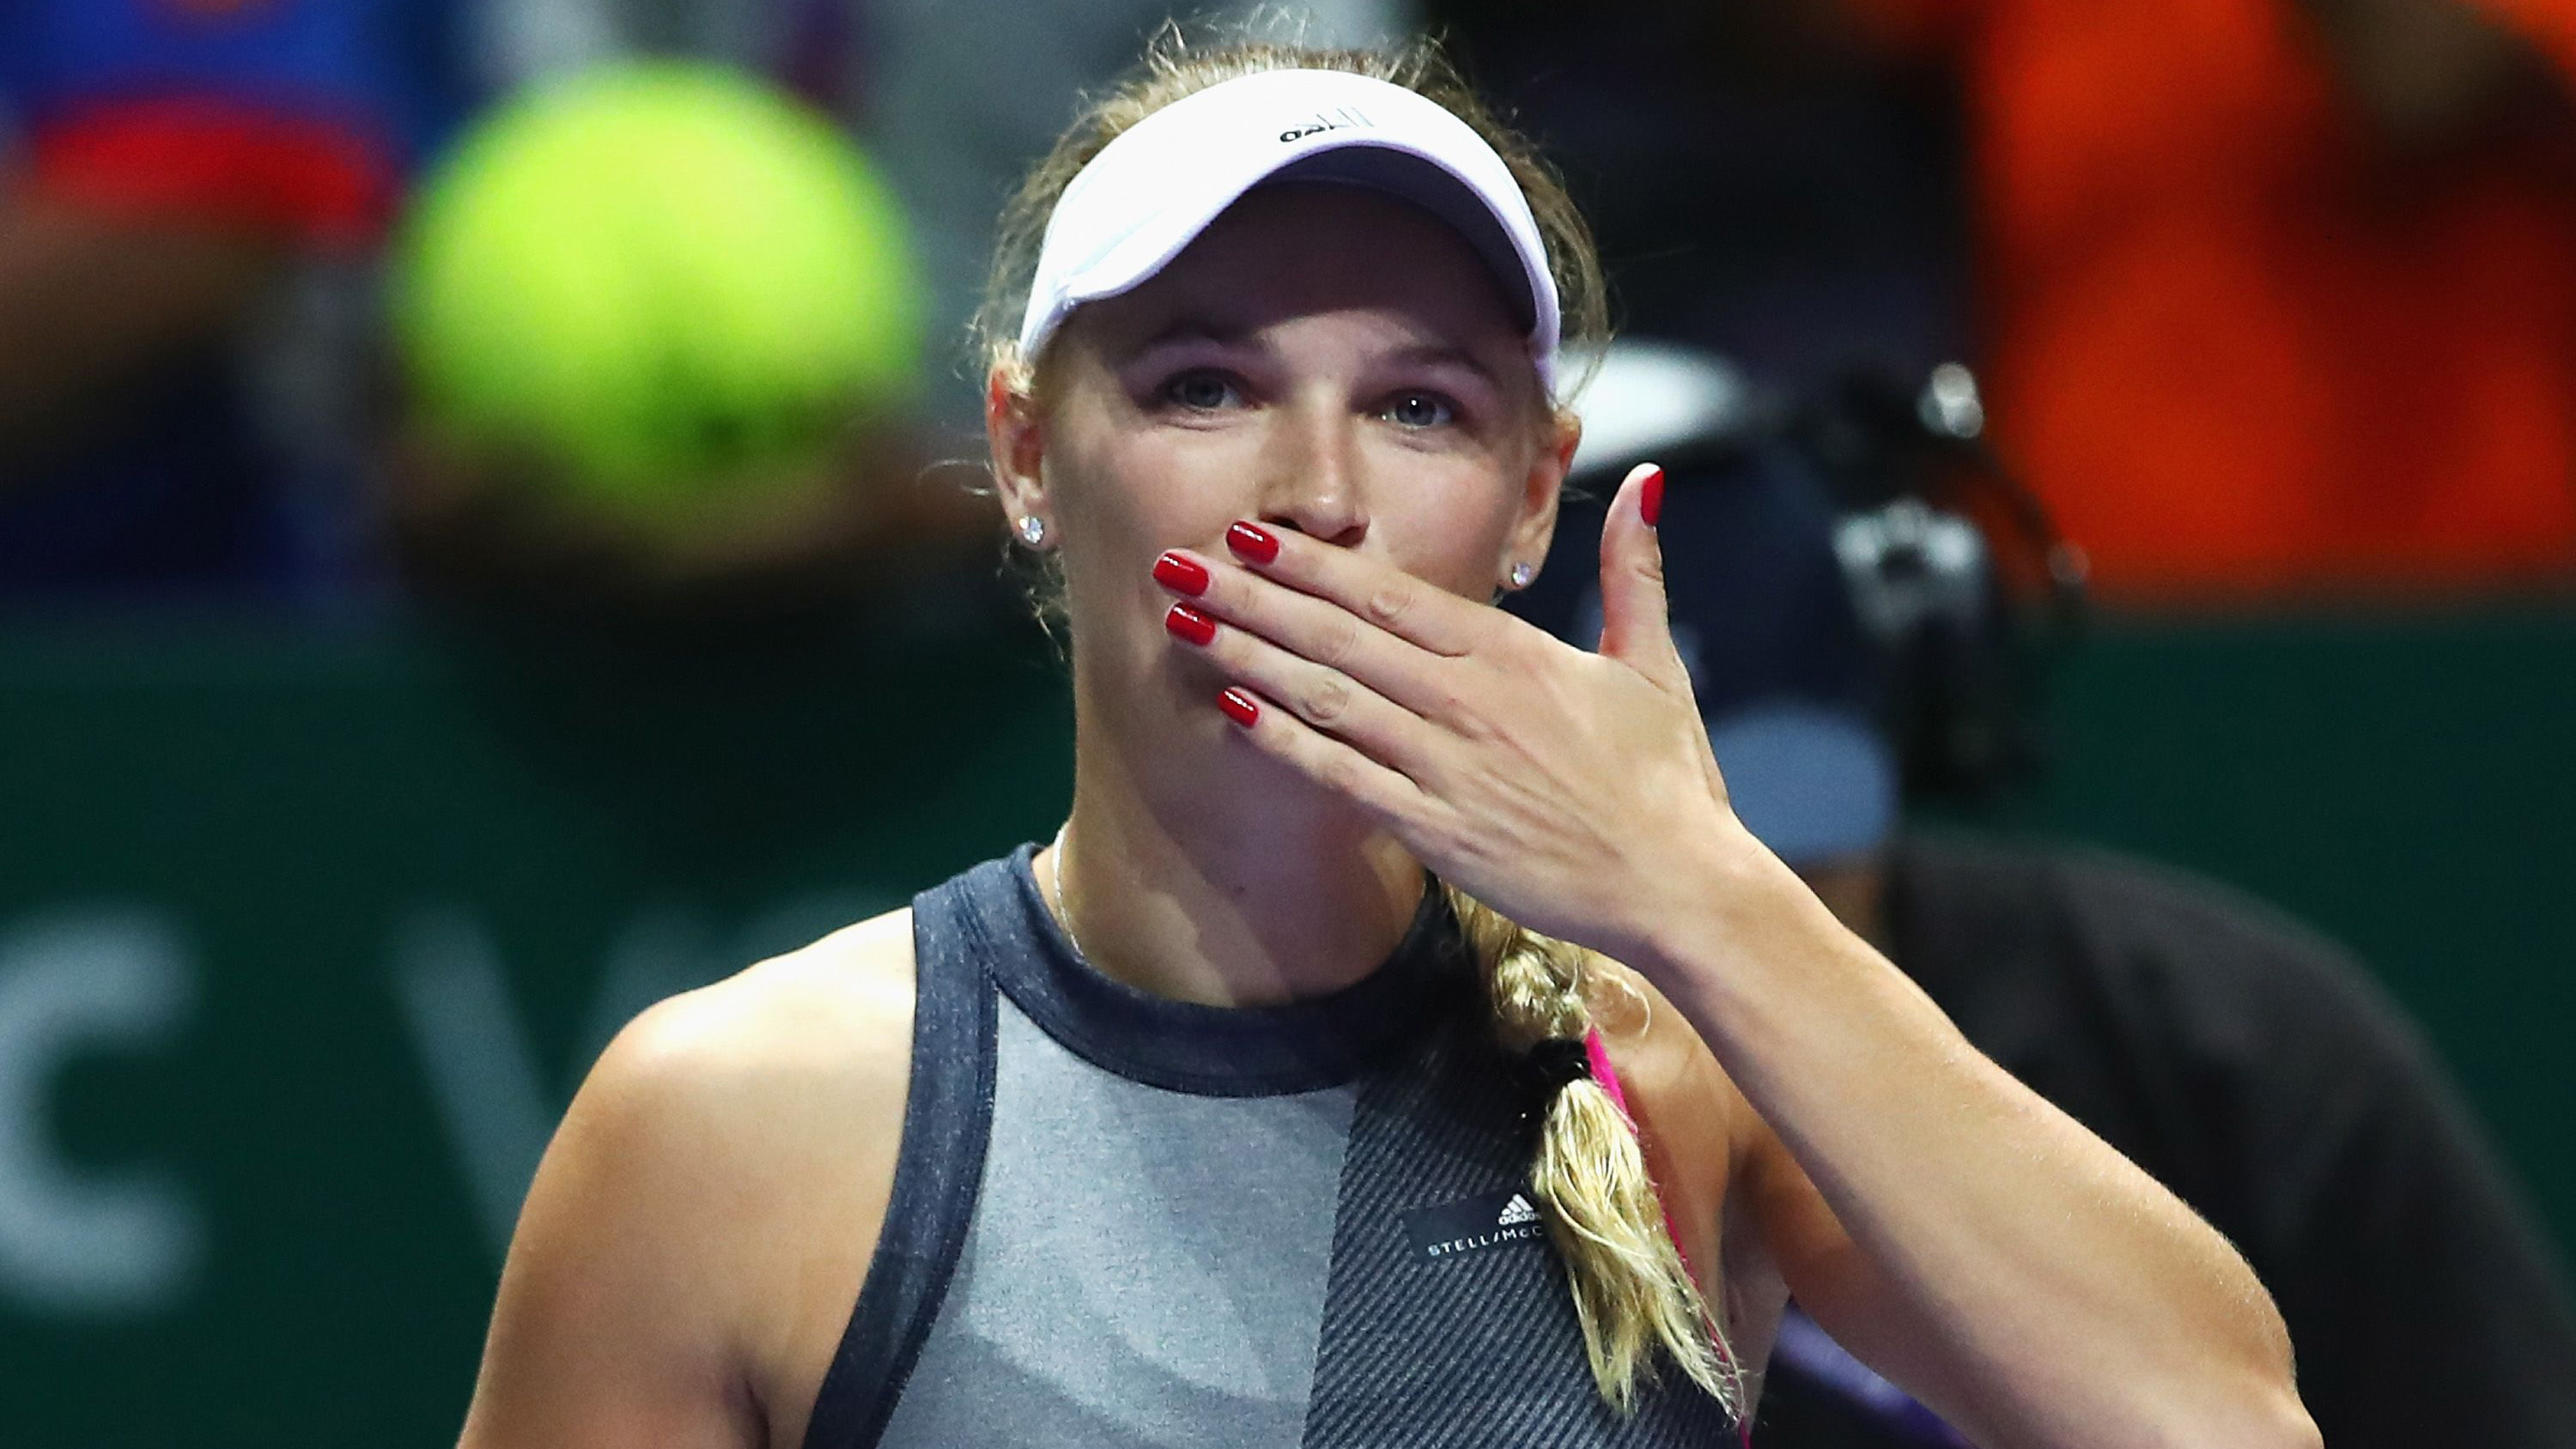 CAROLINE WOZNIACKI NAMED FORBES 8TH MOST INFLUENTIAL WOMAN IN SPORTS